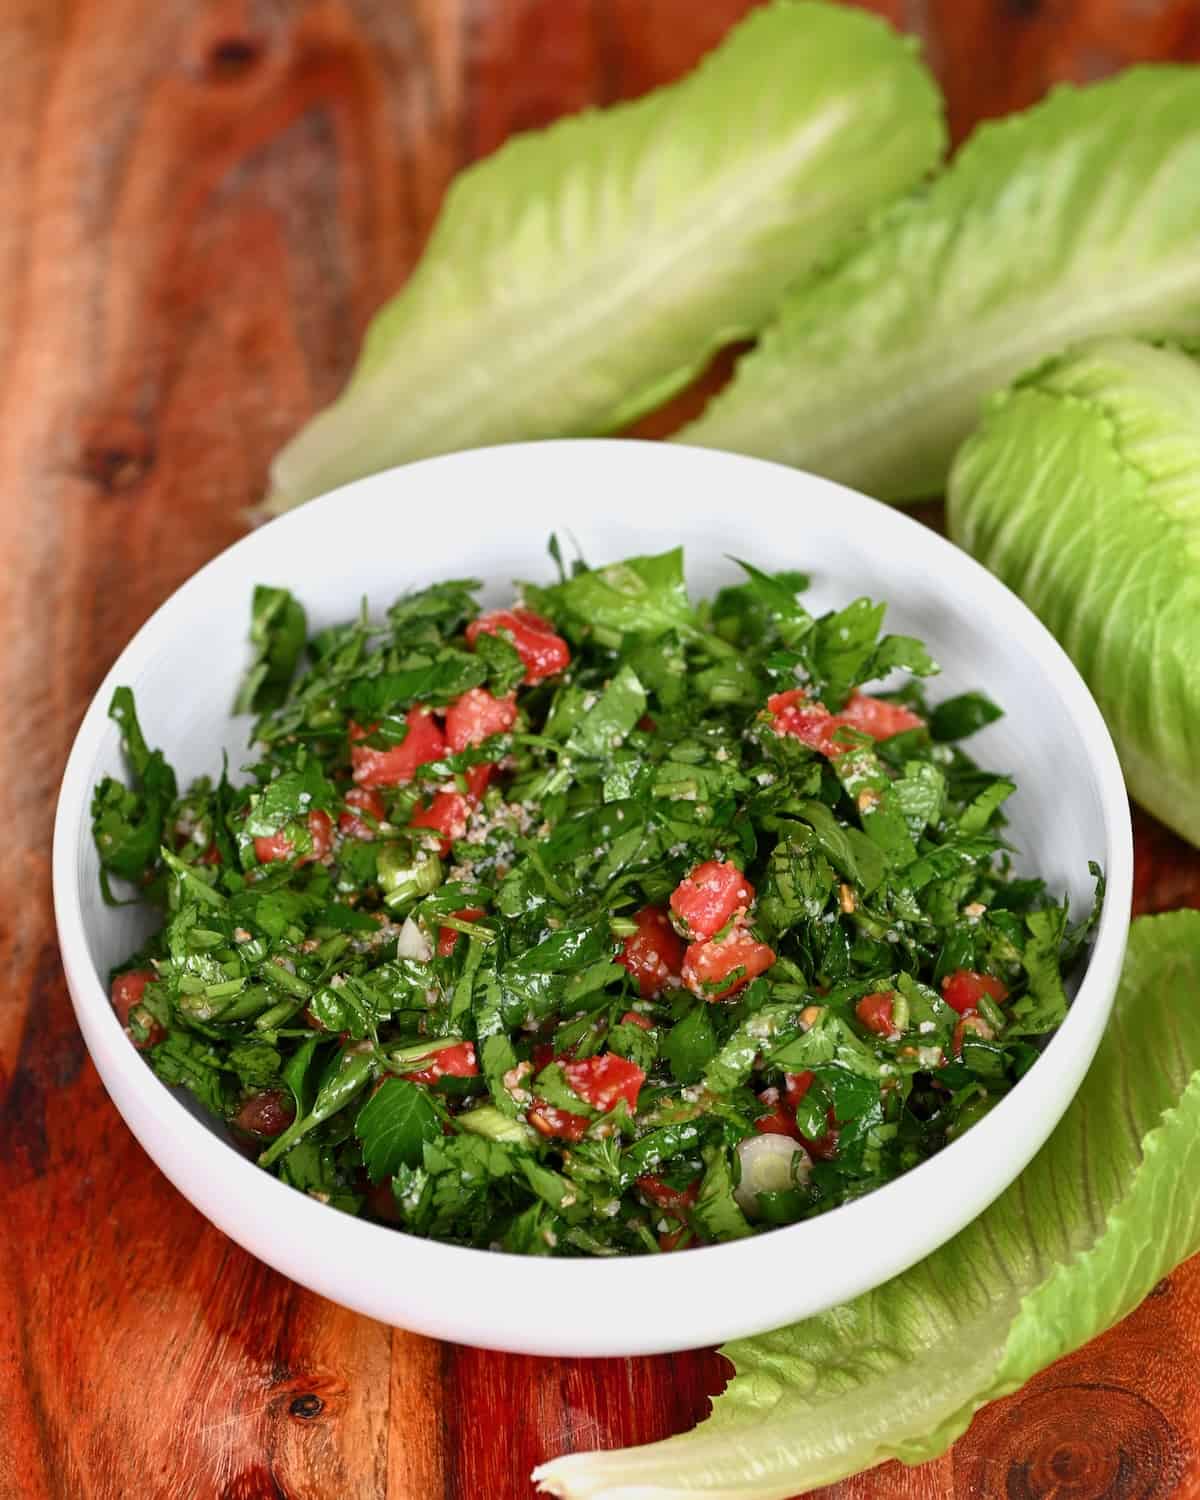 A small bowl with Tabbouleh salad